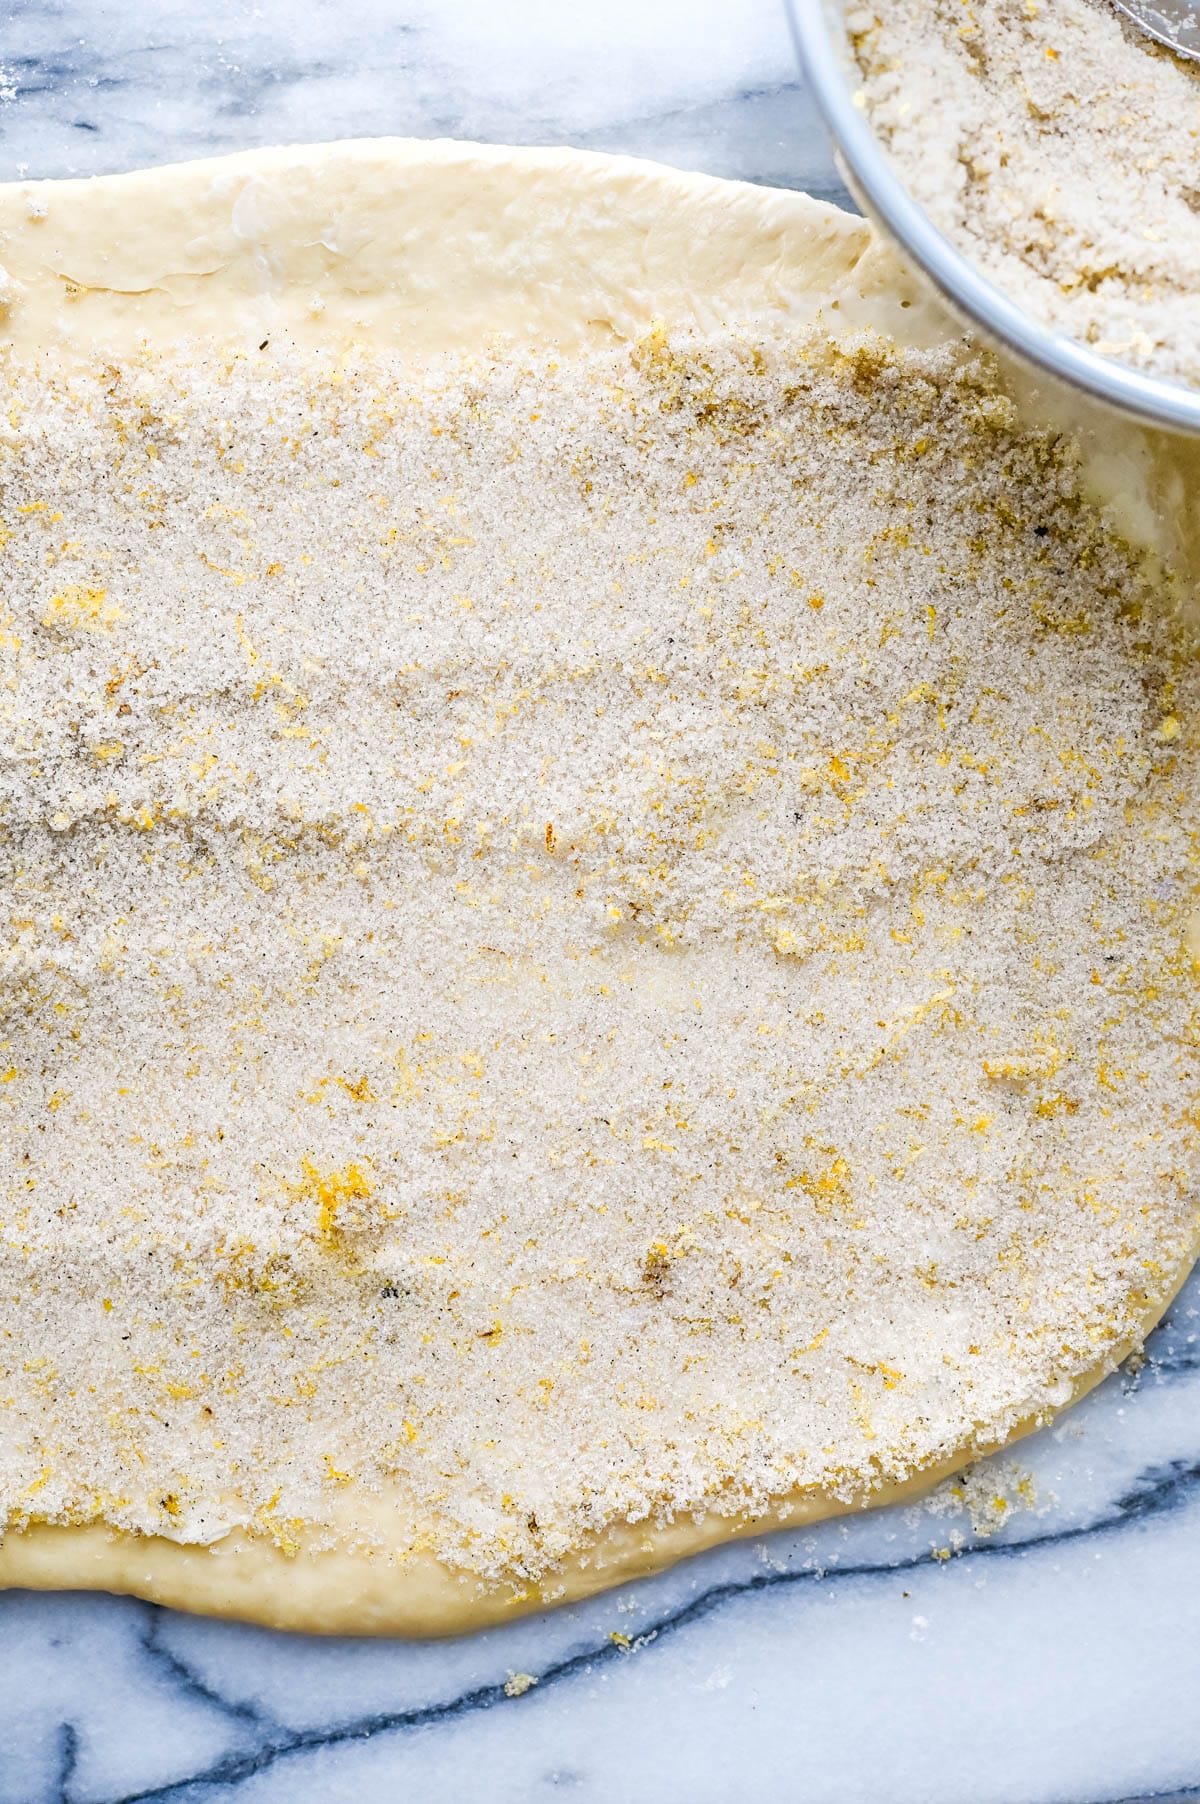 Topping the dough with the lemon sugar filling.